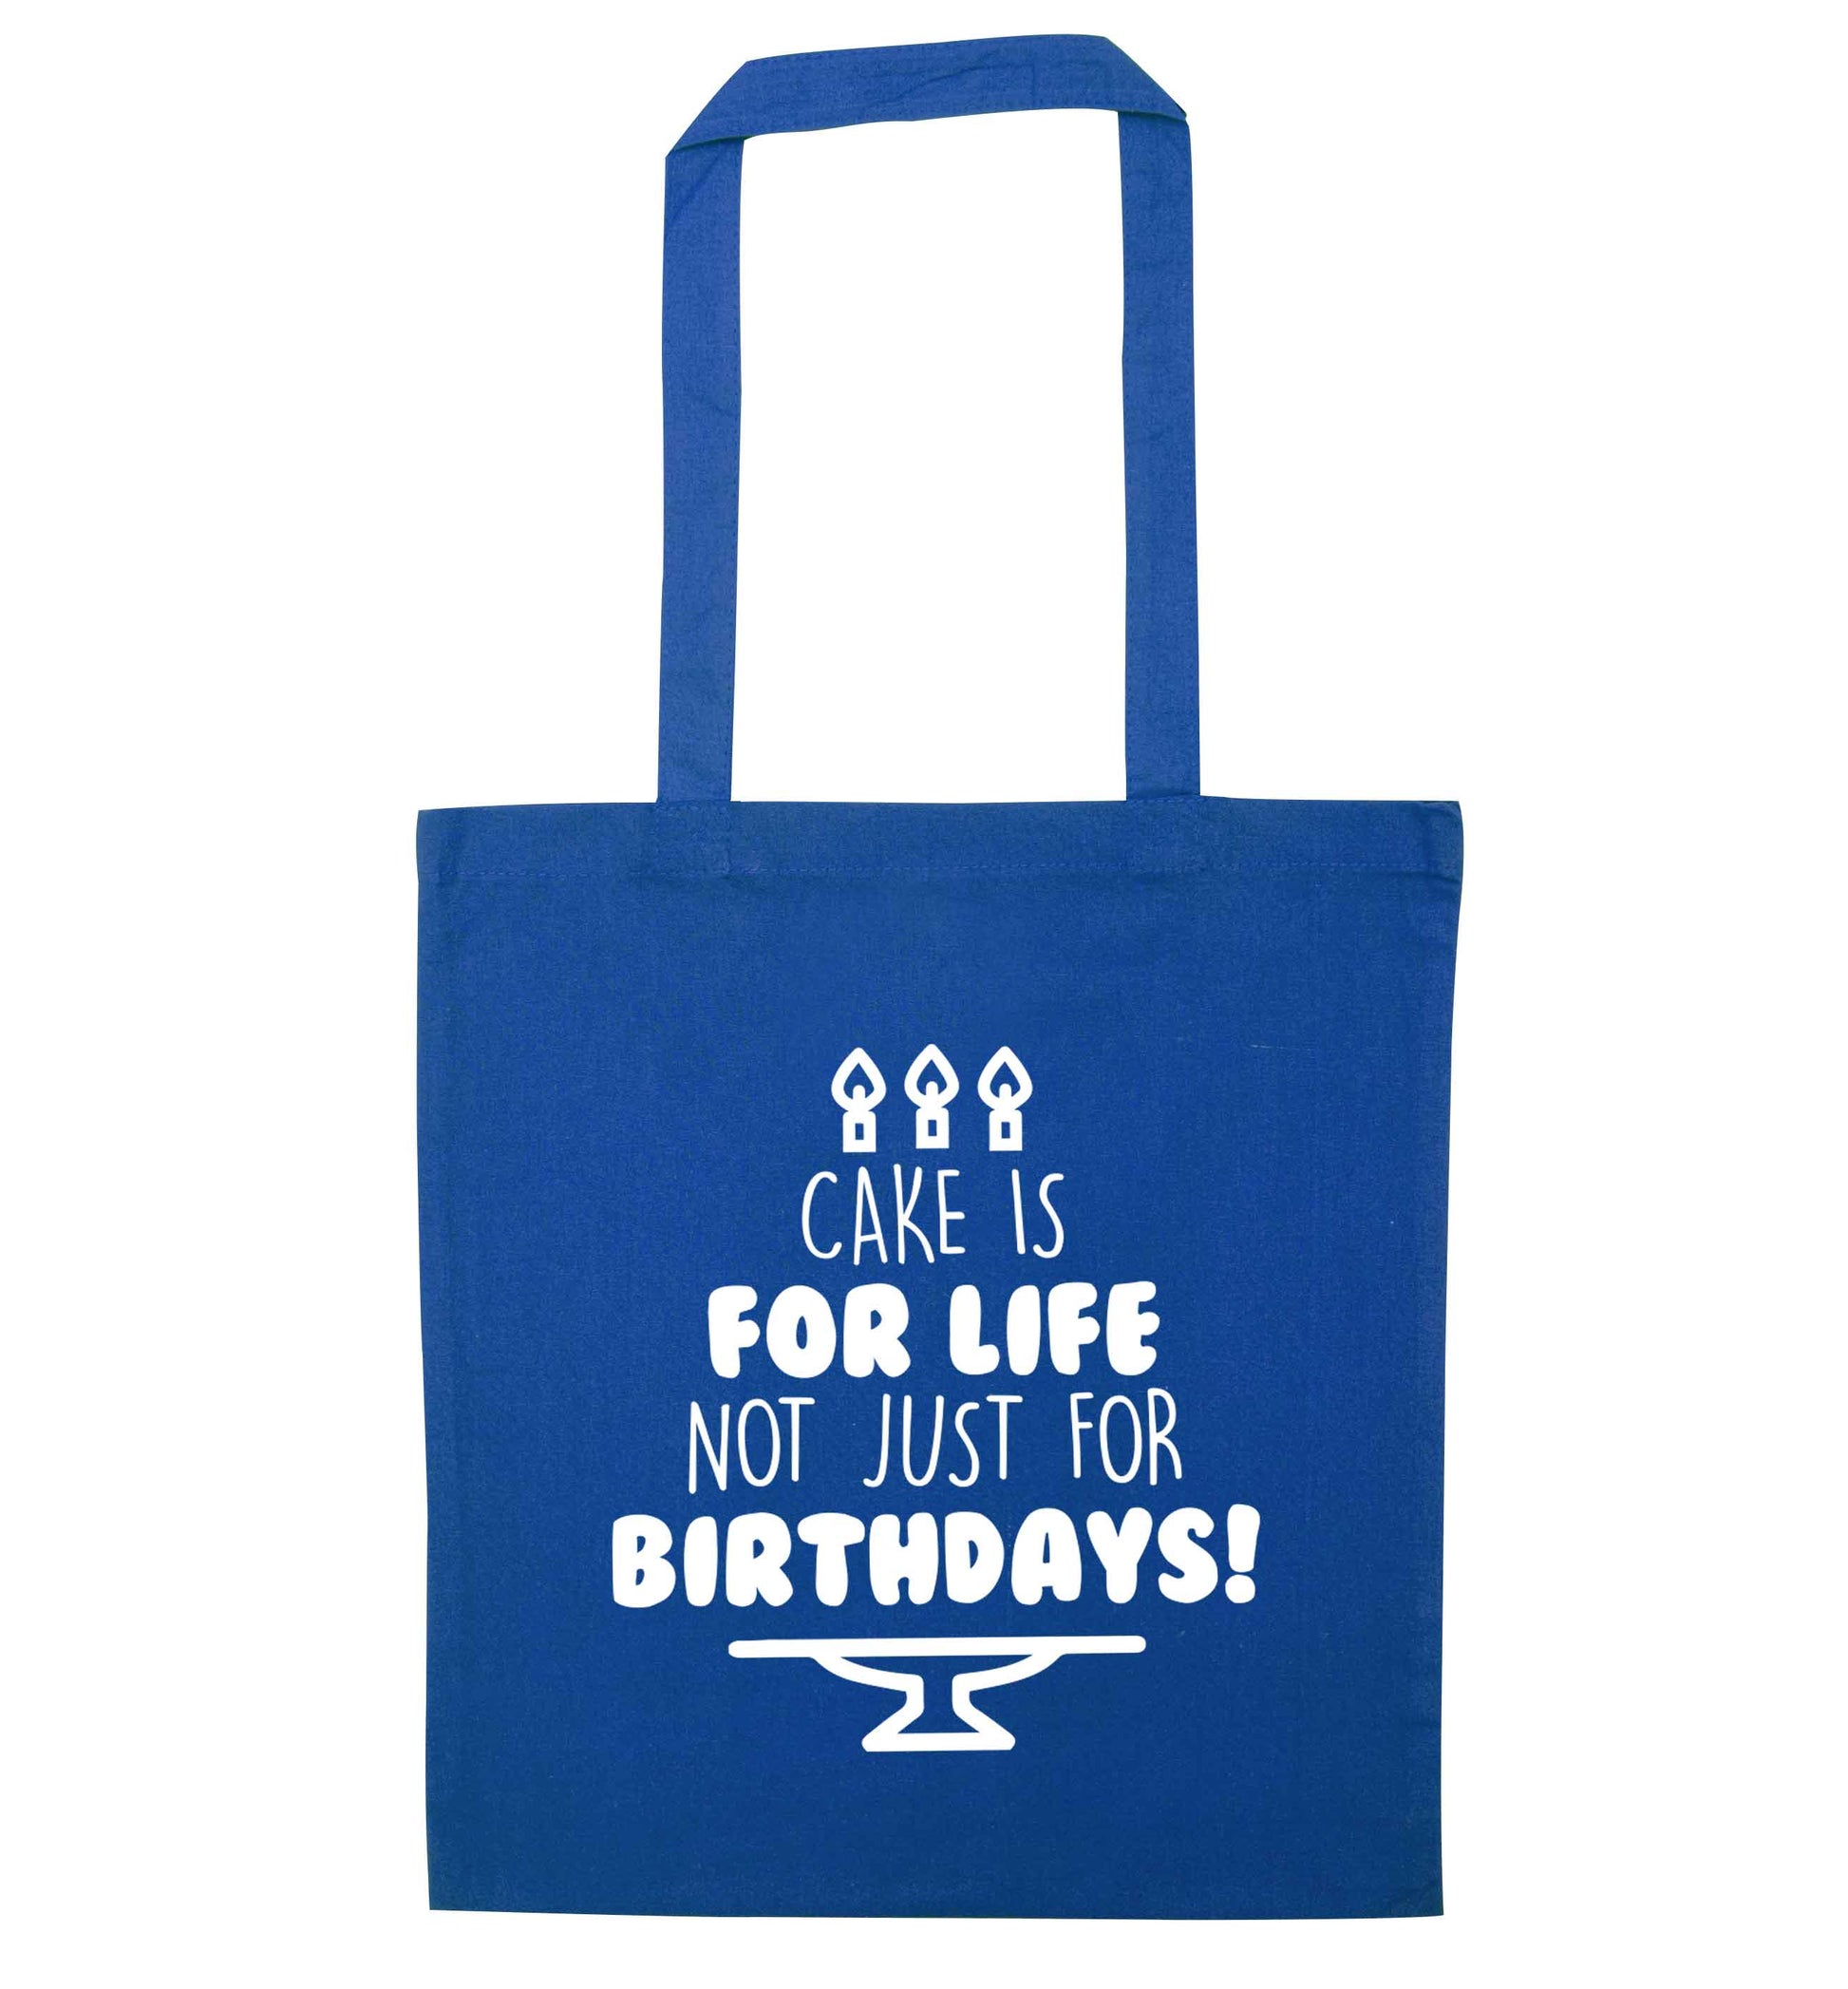 Cake is for life not just for birthdays blue tote bag